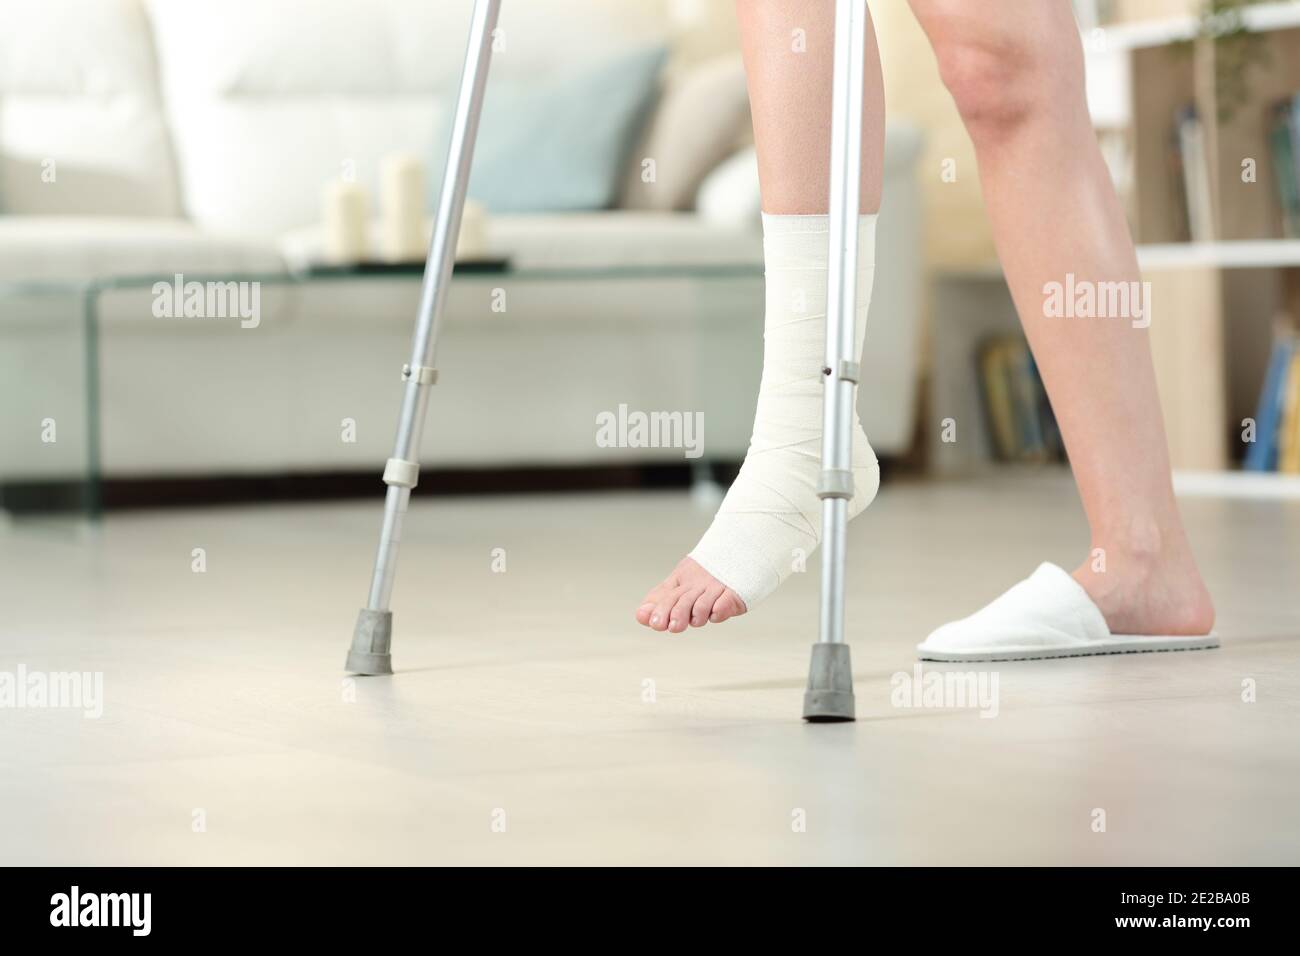 is flat foot a disability